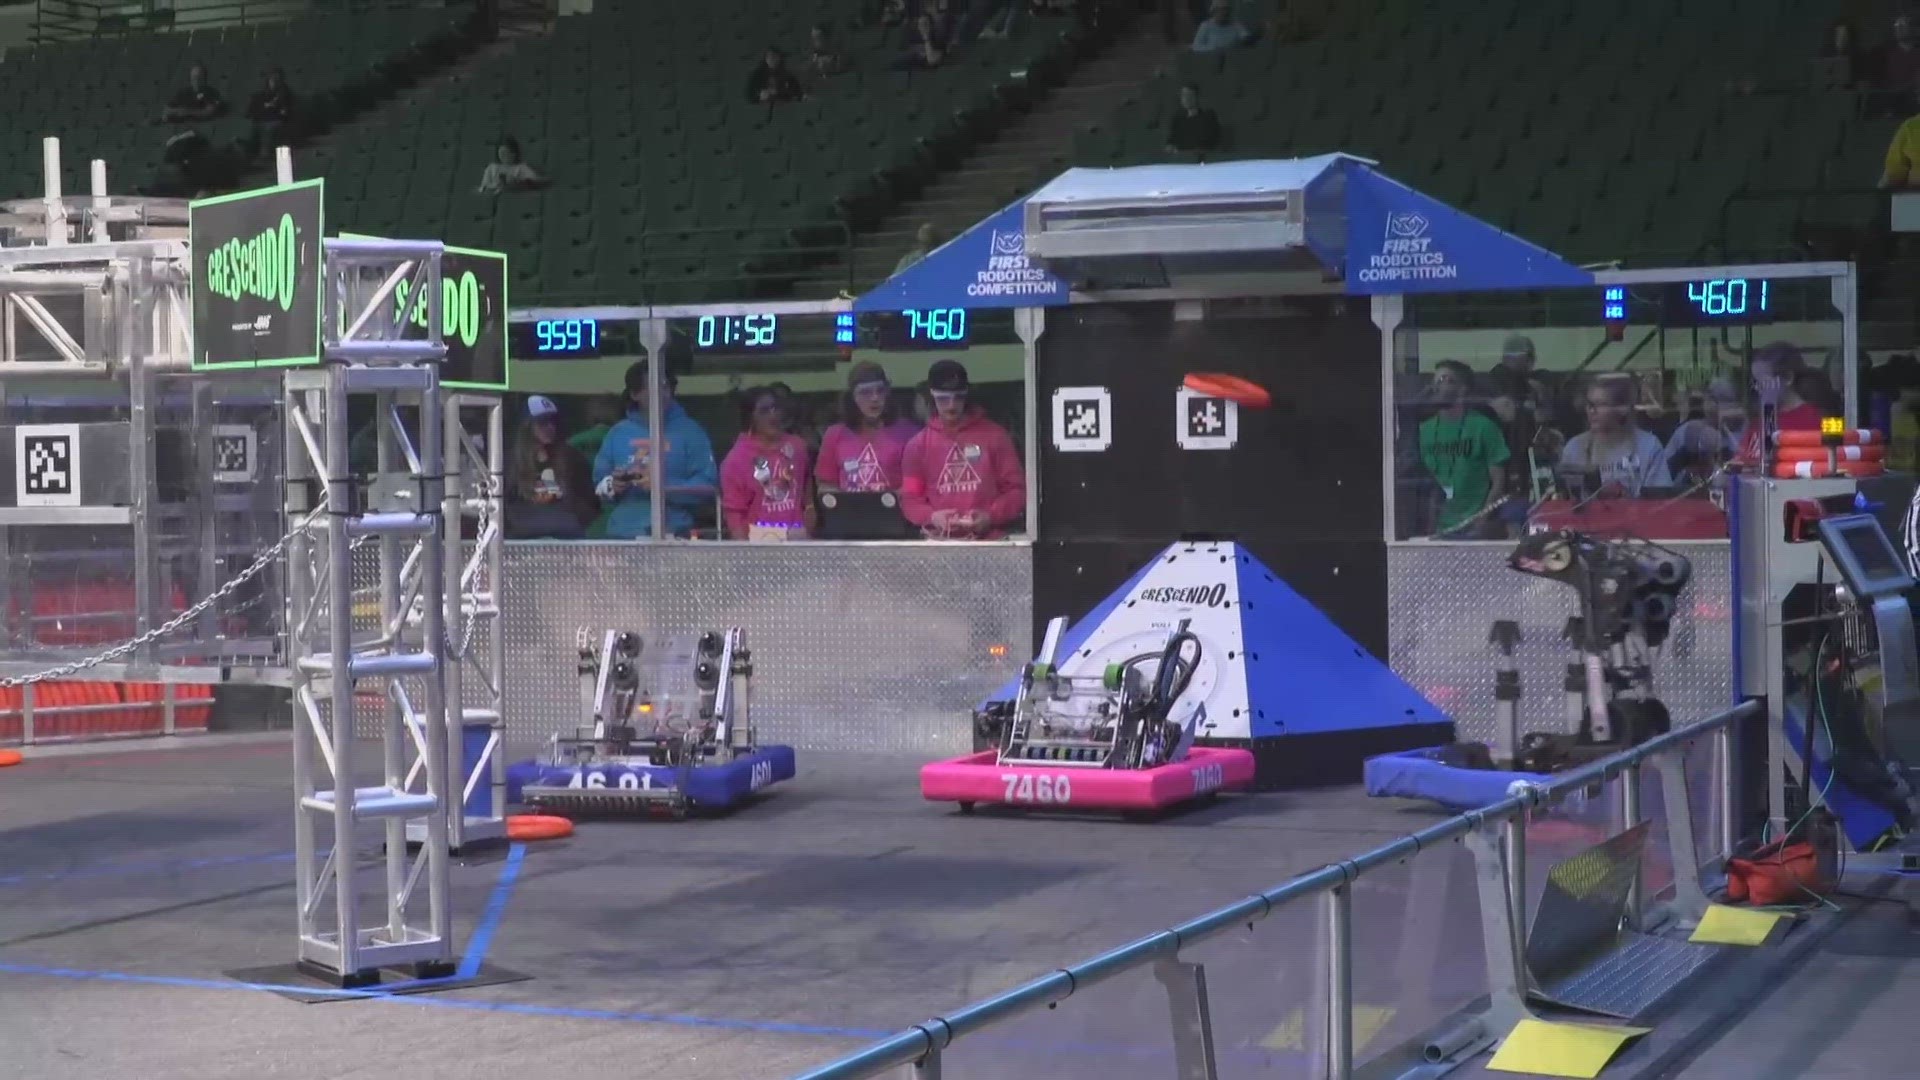 For 25 years the FIRST Robotics Competition’s Buckeye Regional has brought together thousands of students to test, build and compete with robots they made.